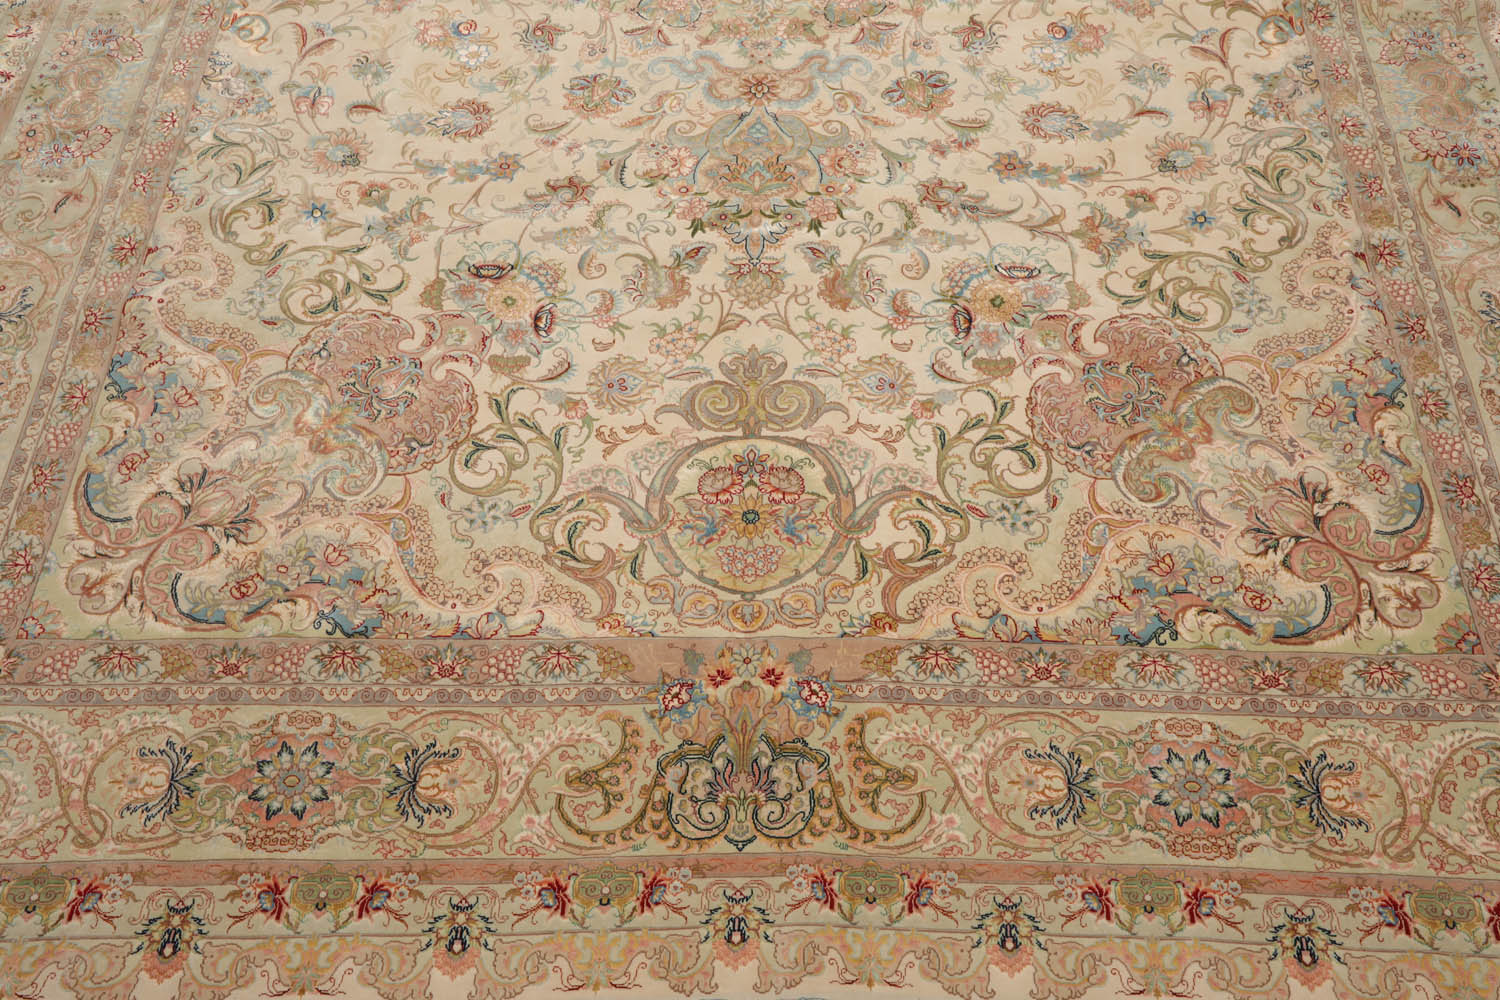 Elwin 8x10 Hand Knotted Wool and Silk Traditional Tabriz 300 KPSI Oriental Area Rug Ivory, Taupe Color